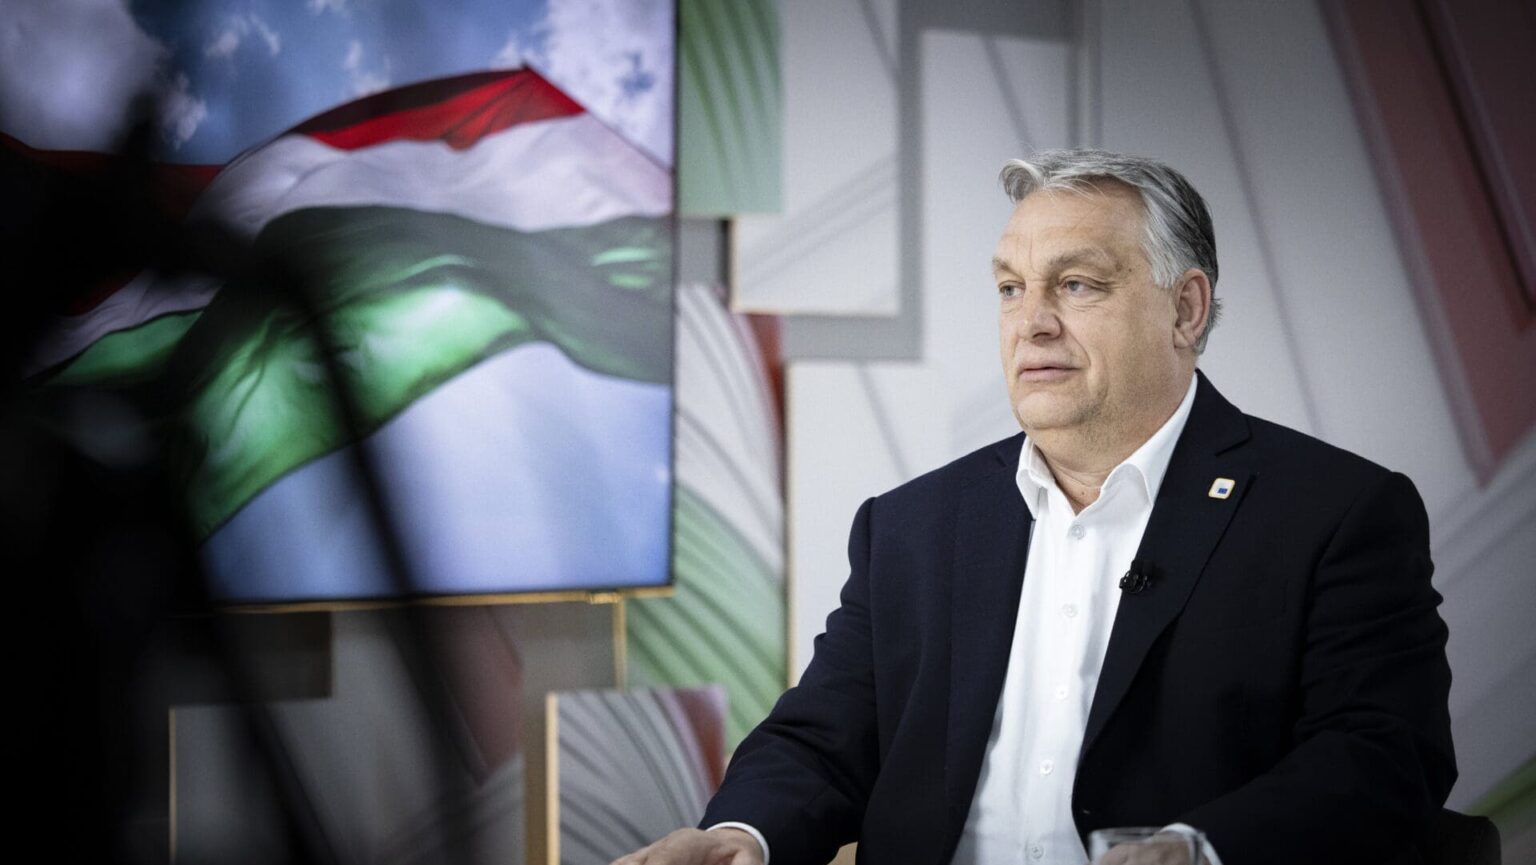 Hungarian Prime Minister: The European Parliament Needs as Many Peace-Loving Politicians as Possible